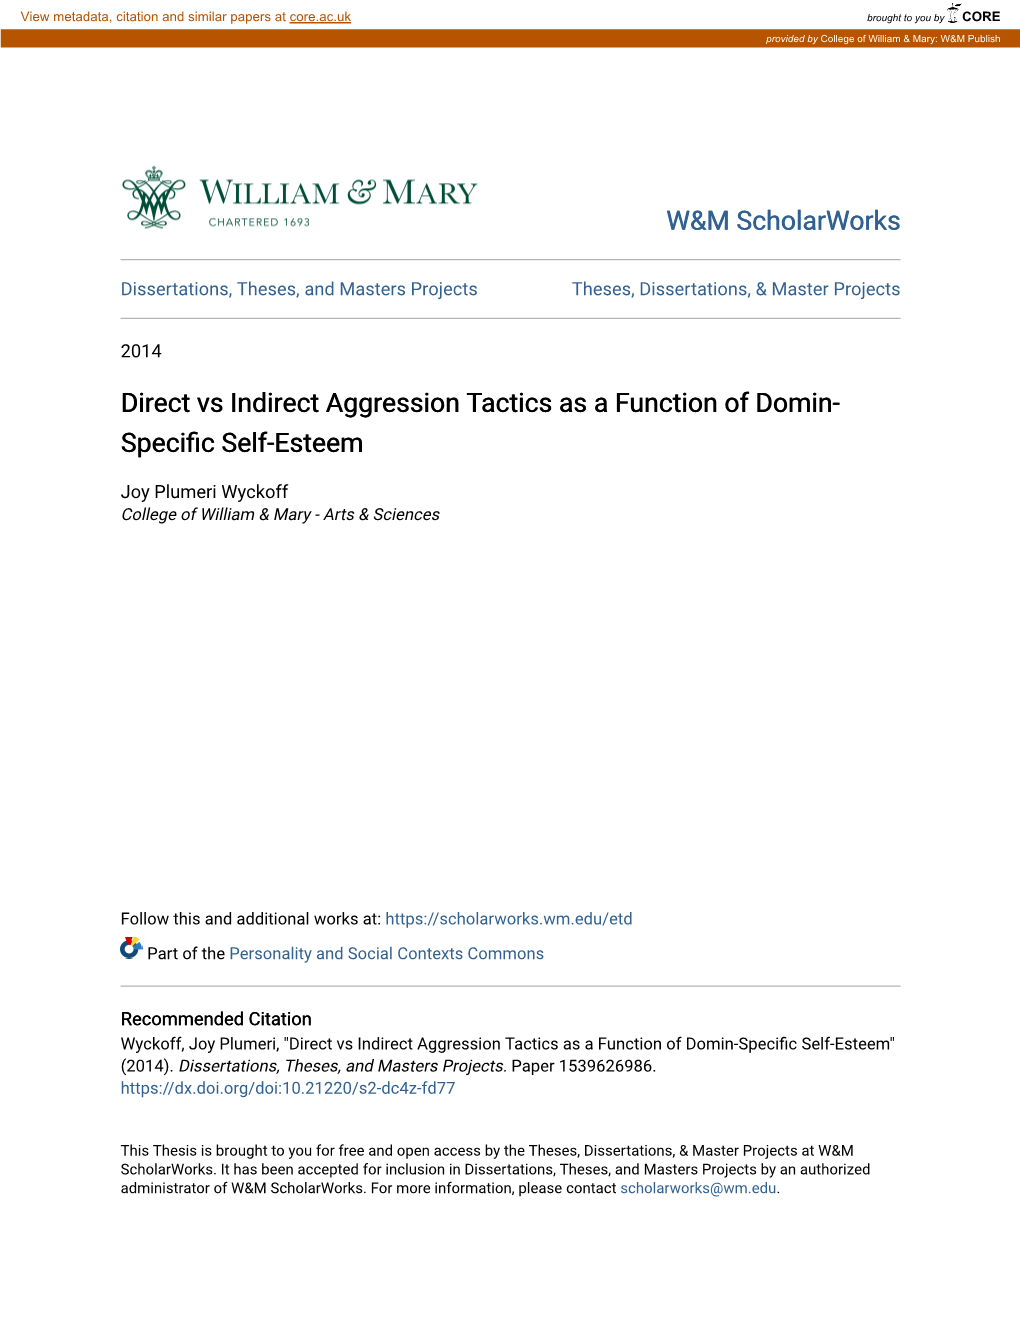 Direct Vs Indirect Aggression Tactics As a Function of Domin-Specific Self-Esteem" (2014)